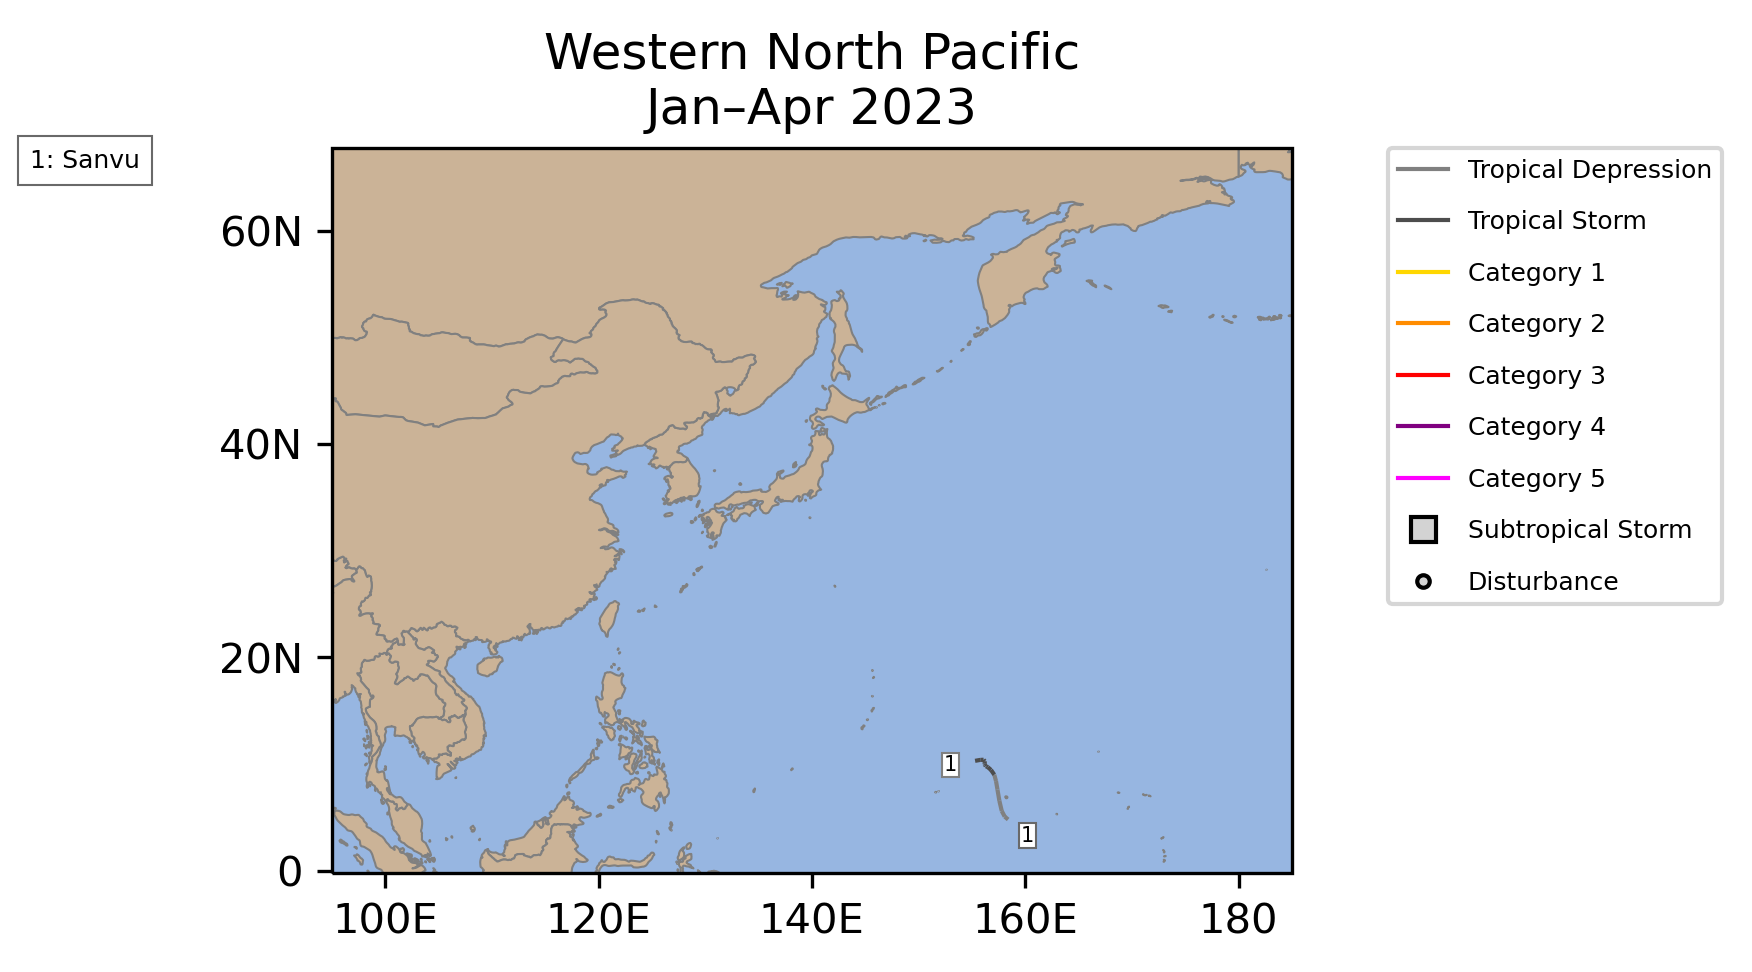 West Pacific Tropical Cyclone Storm Tracks January-April 2023